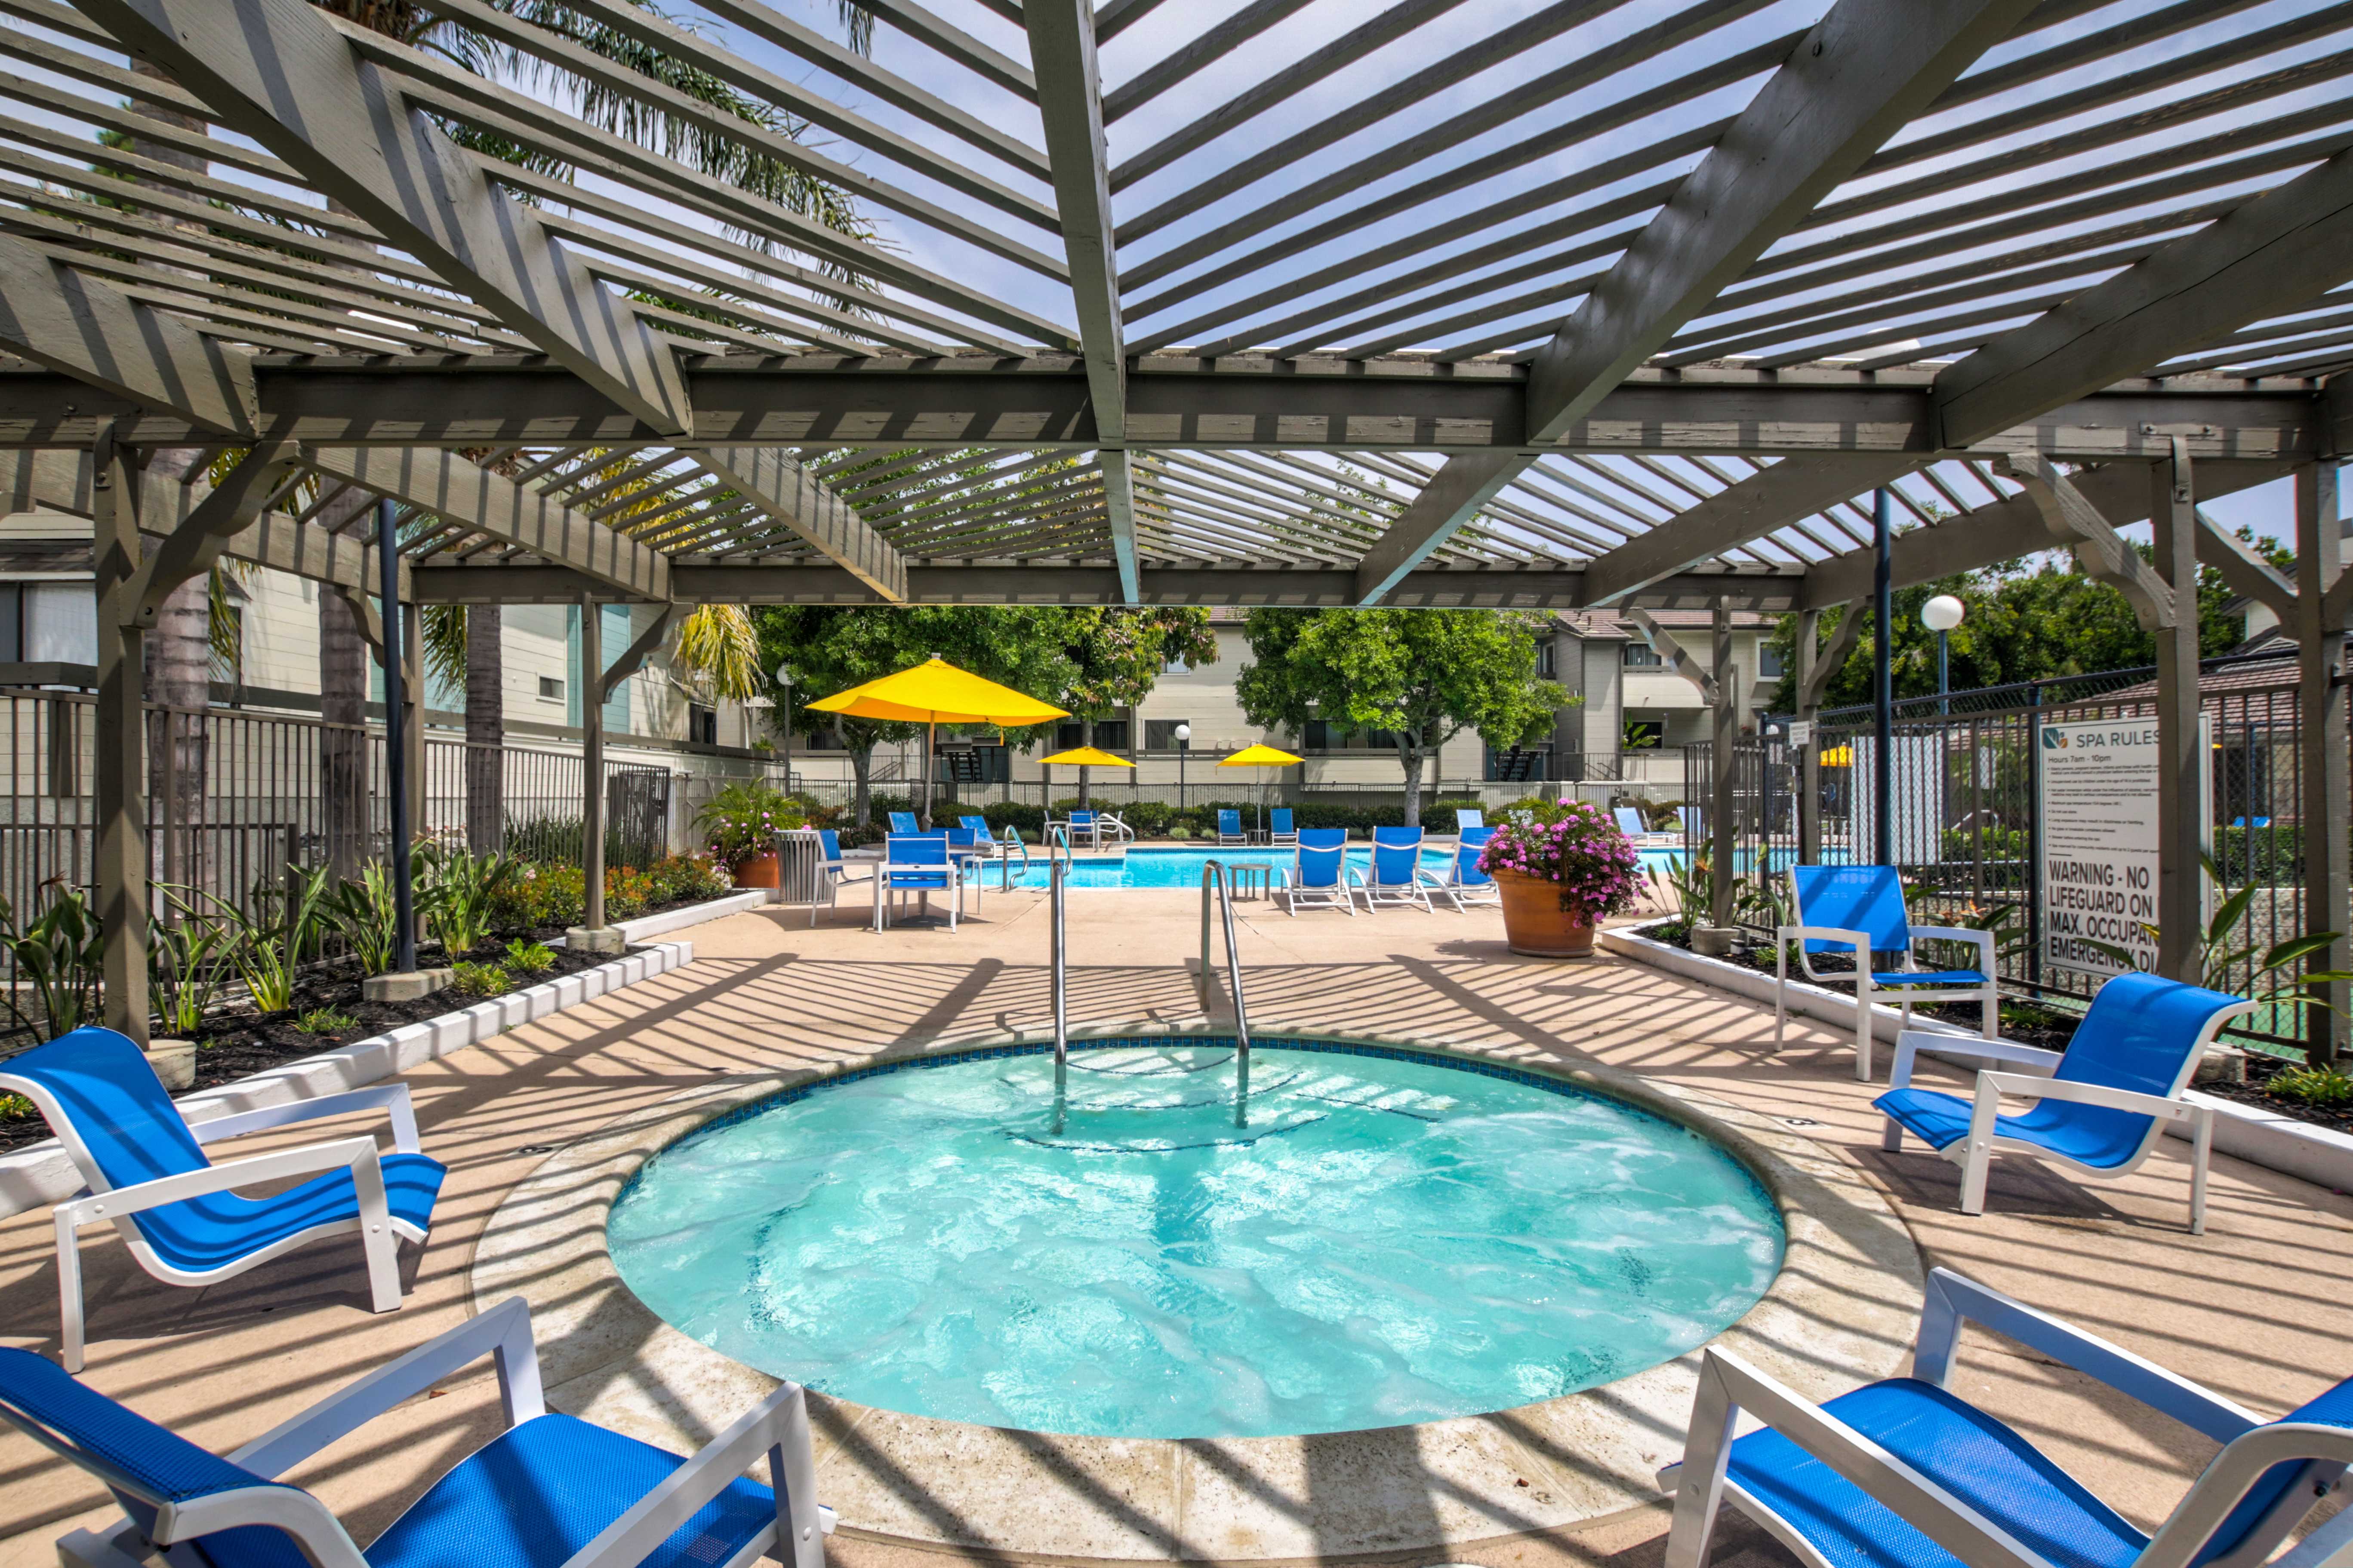 Different view of pool area. Hot tub and a pool a few steps away are visible. There are multiple blue lounging chairs and plants surrounding the area. There are also a few yellow umbrellas for shade.